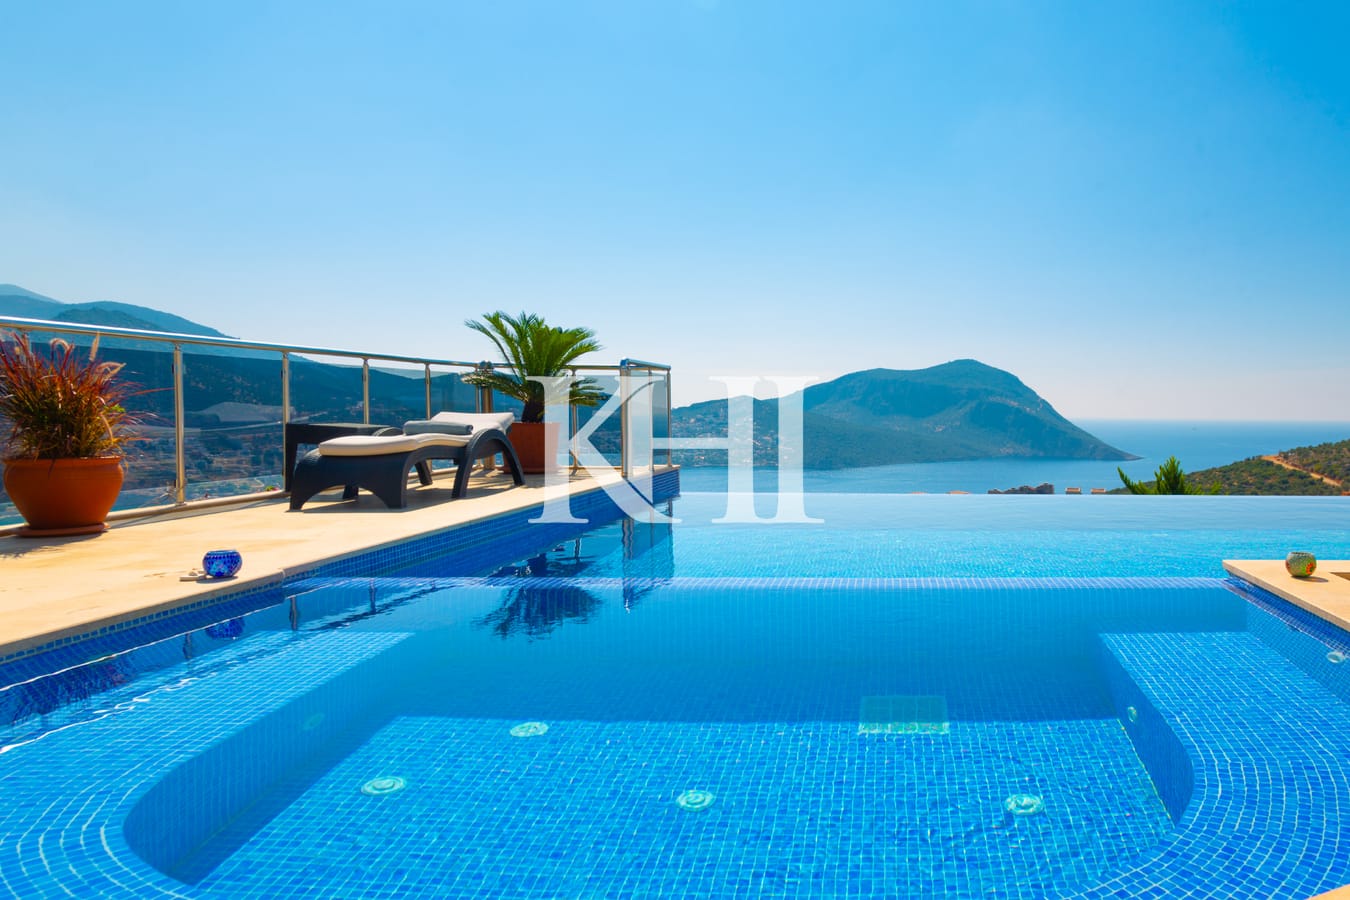 Detached Villa For Sale With Panoramic Kalkan View Slide Image 5